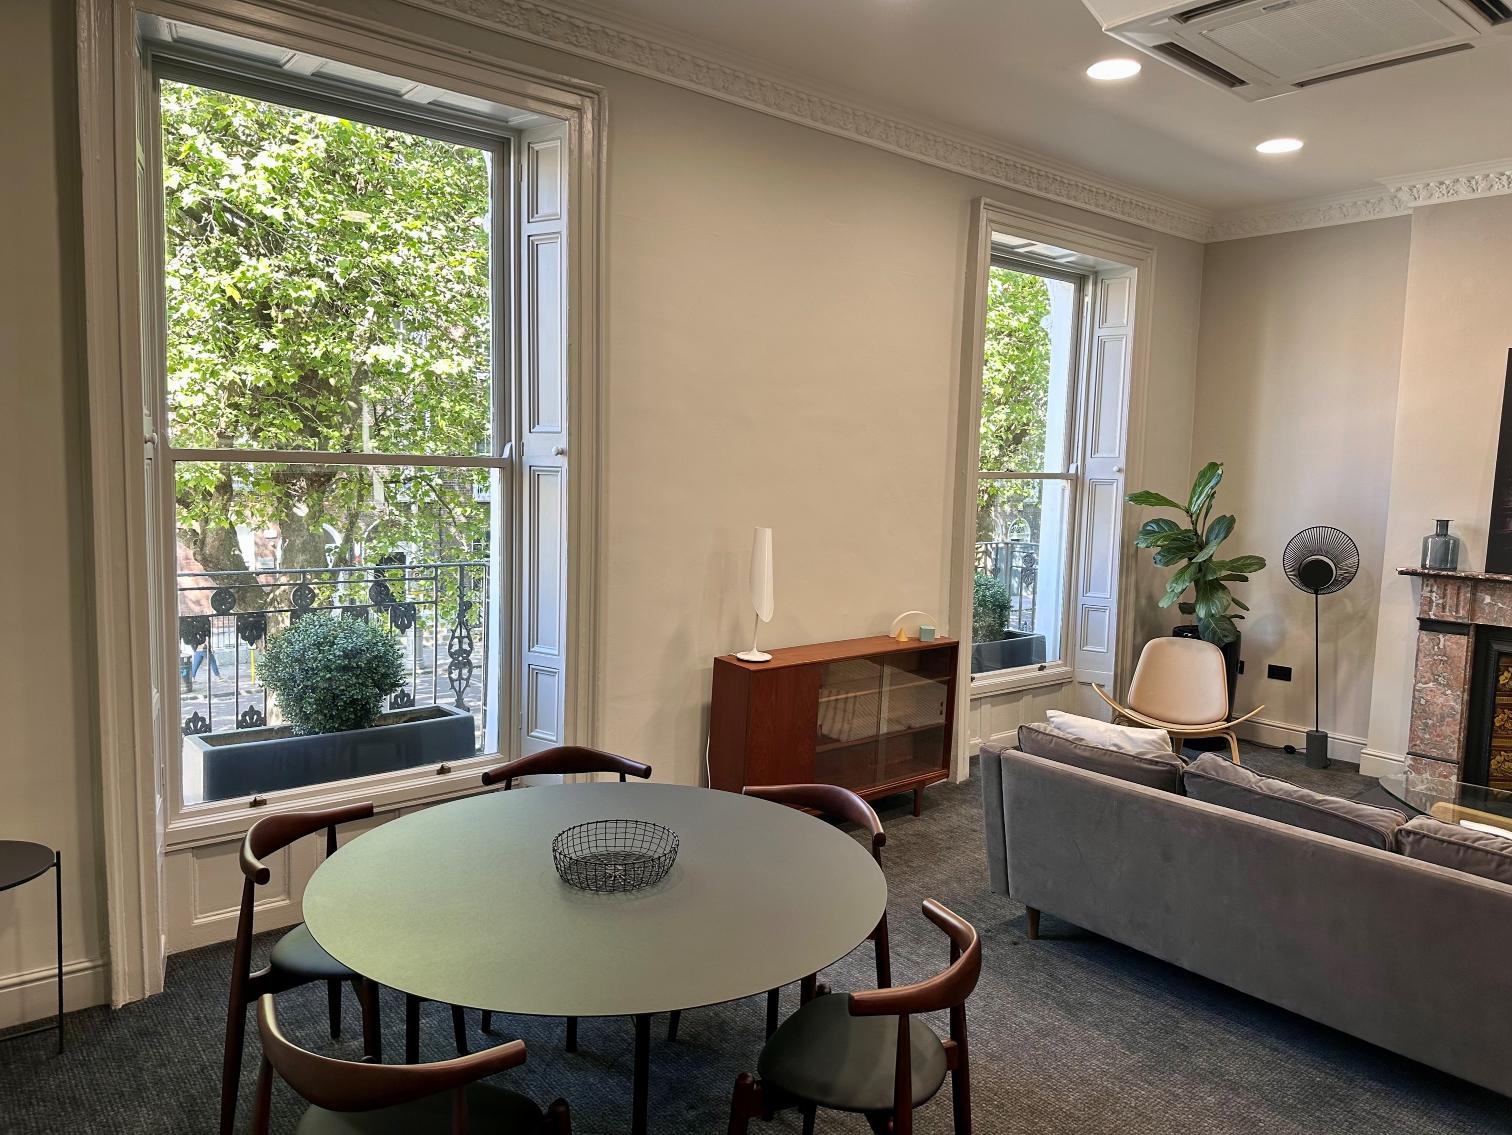 128 Lower Baggot Street, Dublin 2 - flexible office space to rent - open space with table and chairs